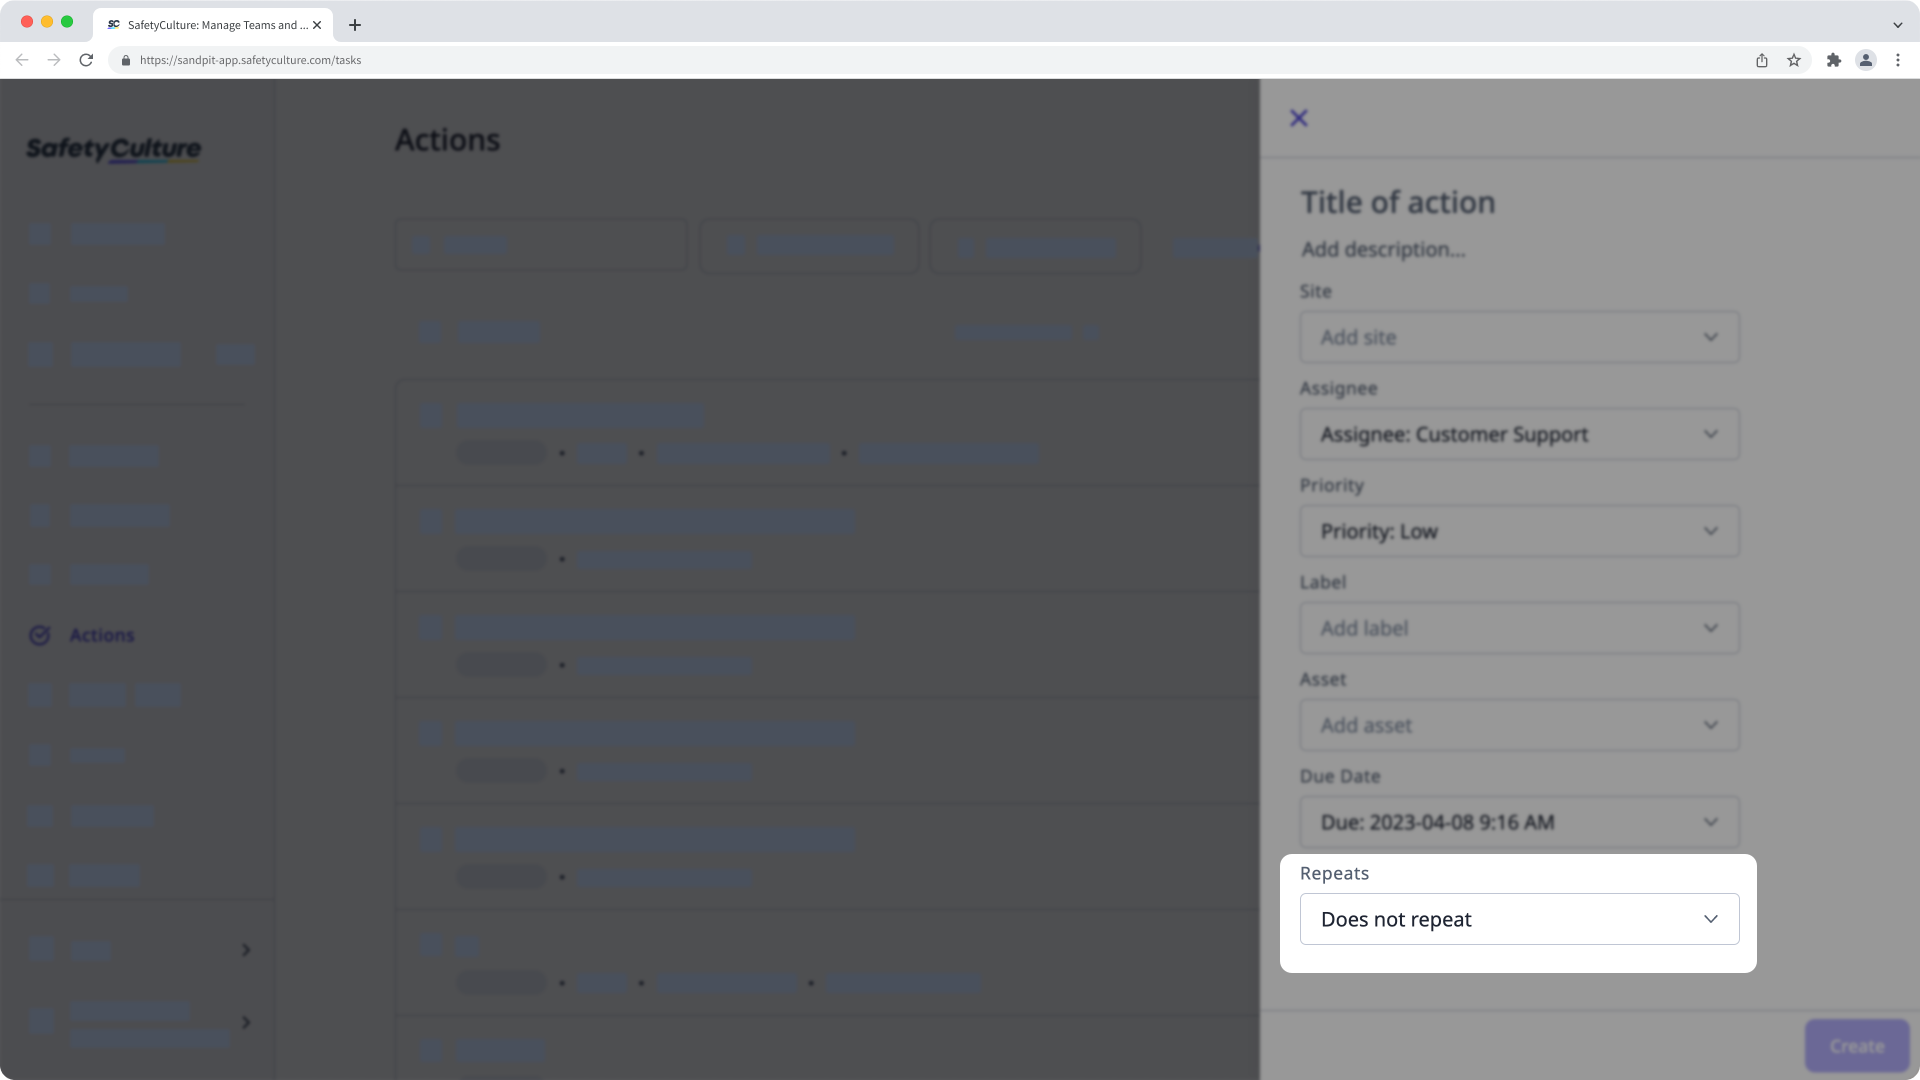 Create a recurring action via the web app.